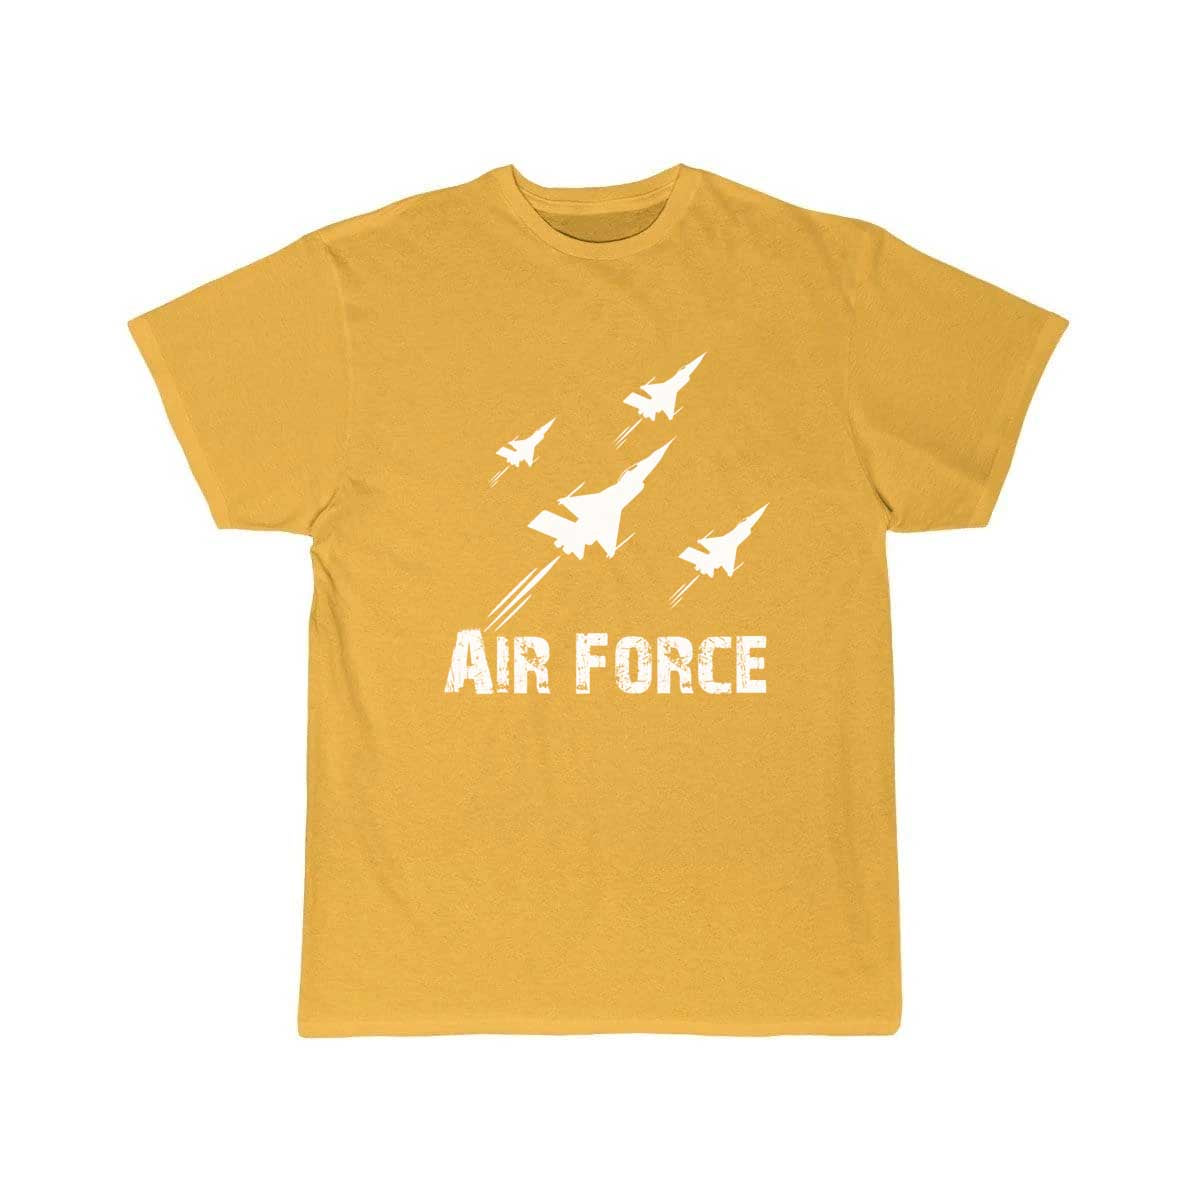 Fly fighter Airforce Jets Tees  T Shirt THE AV8R